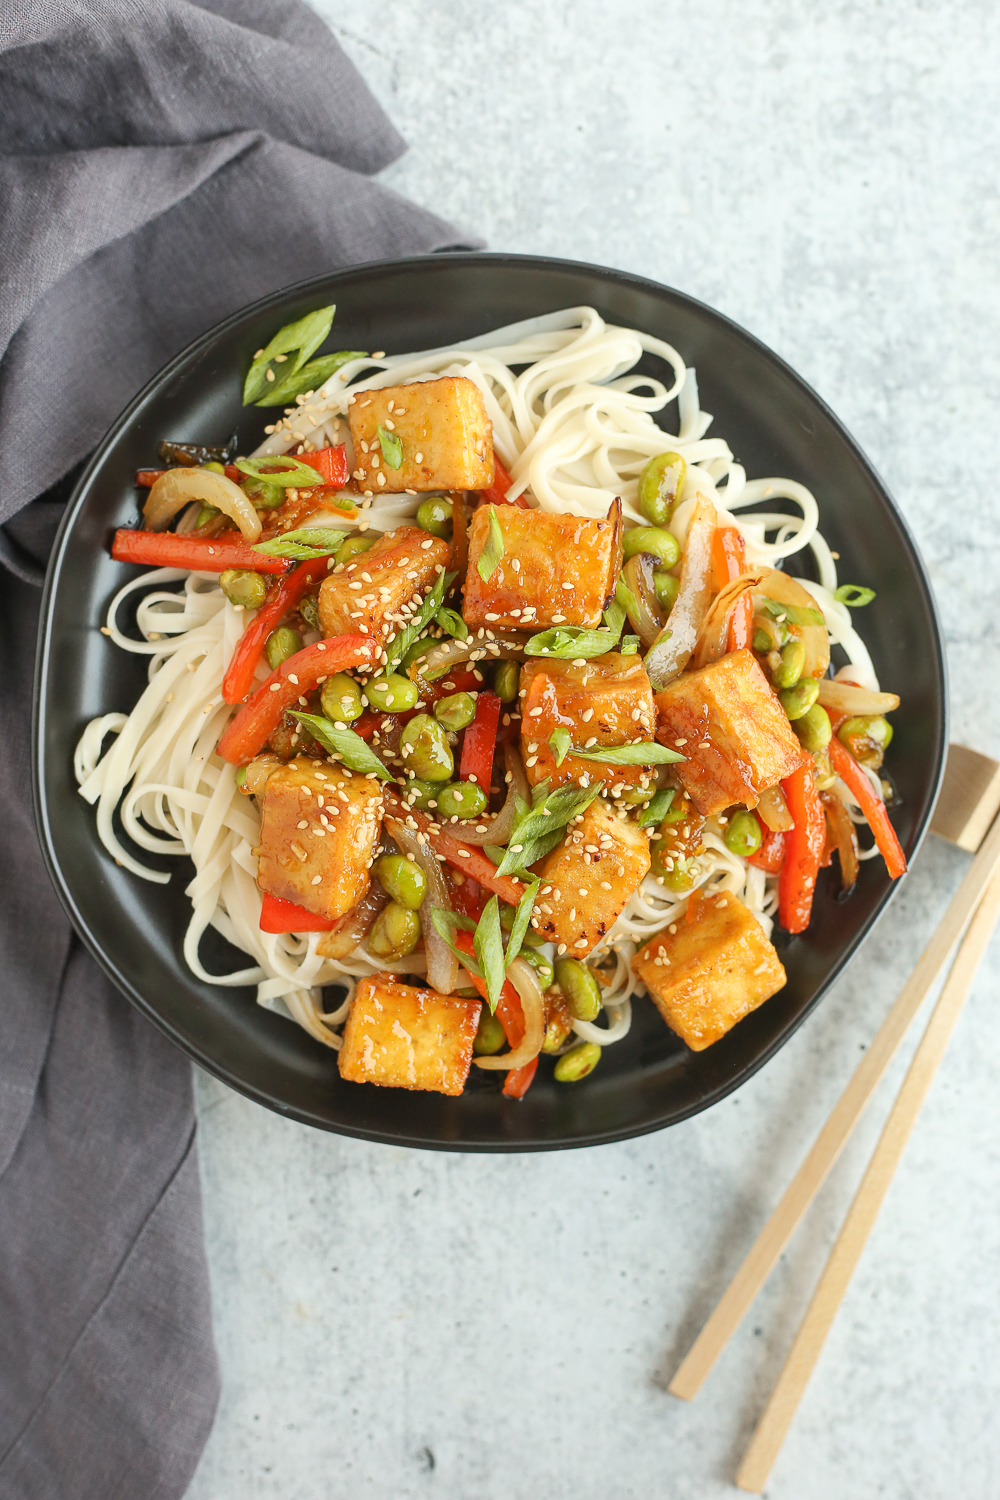 An overhead view of a vegetarian stir fry with crispy orange tofu with noodles, served on a black ceramic plate with chopsticks